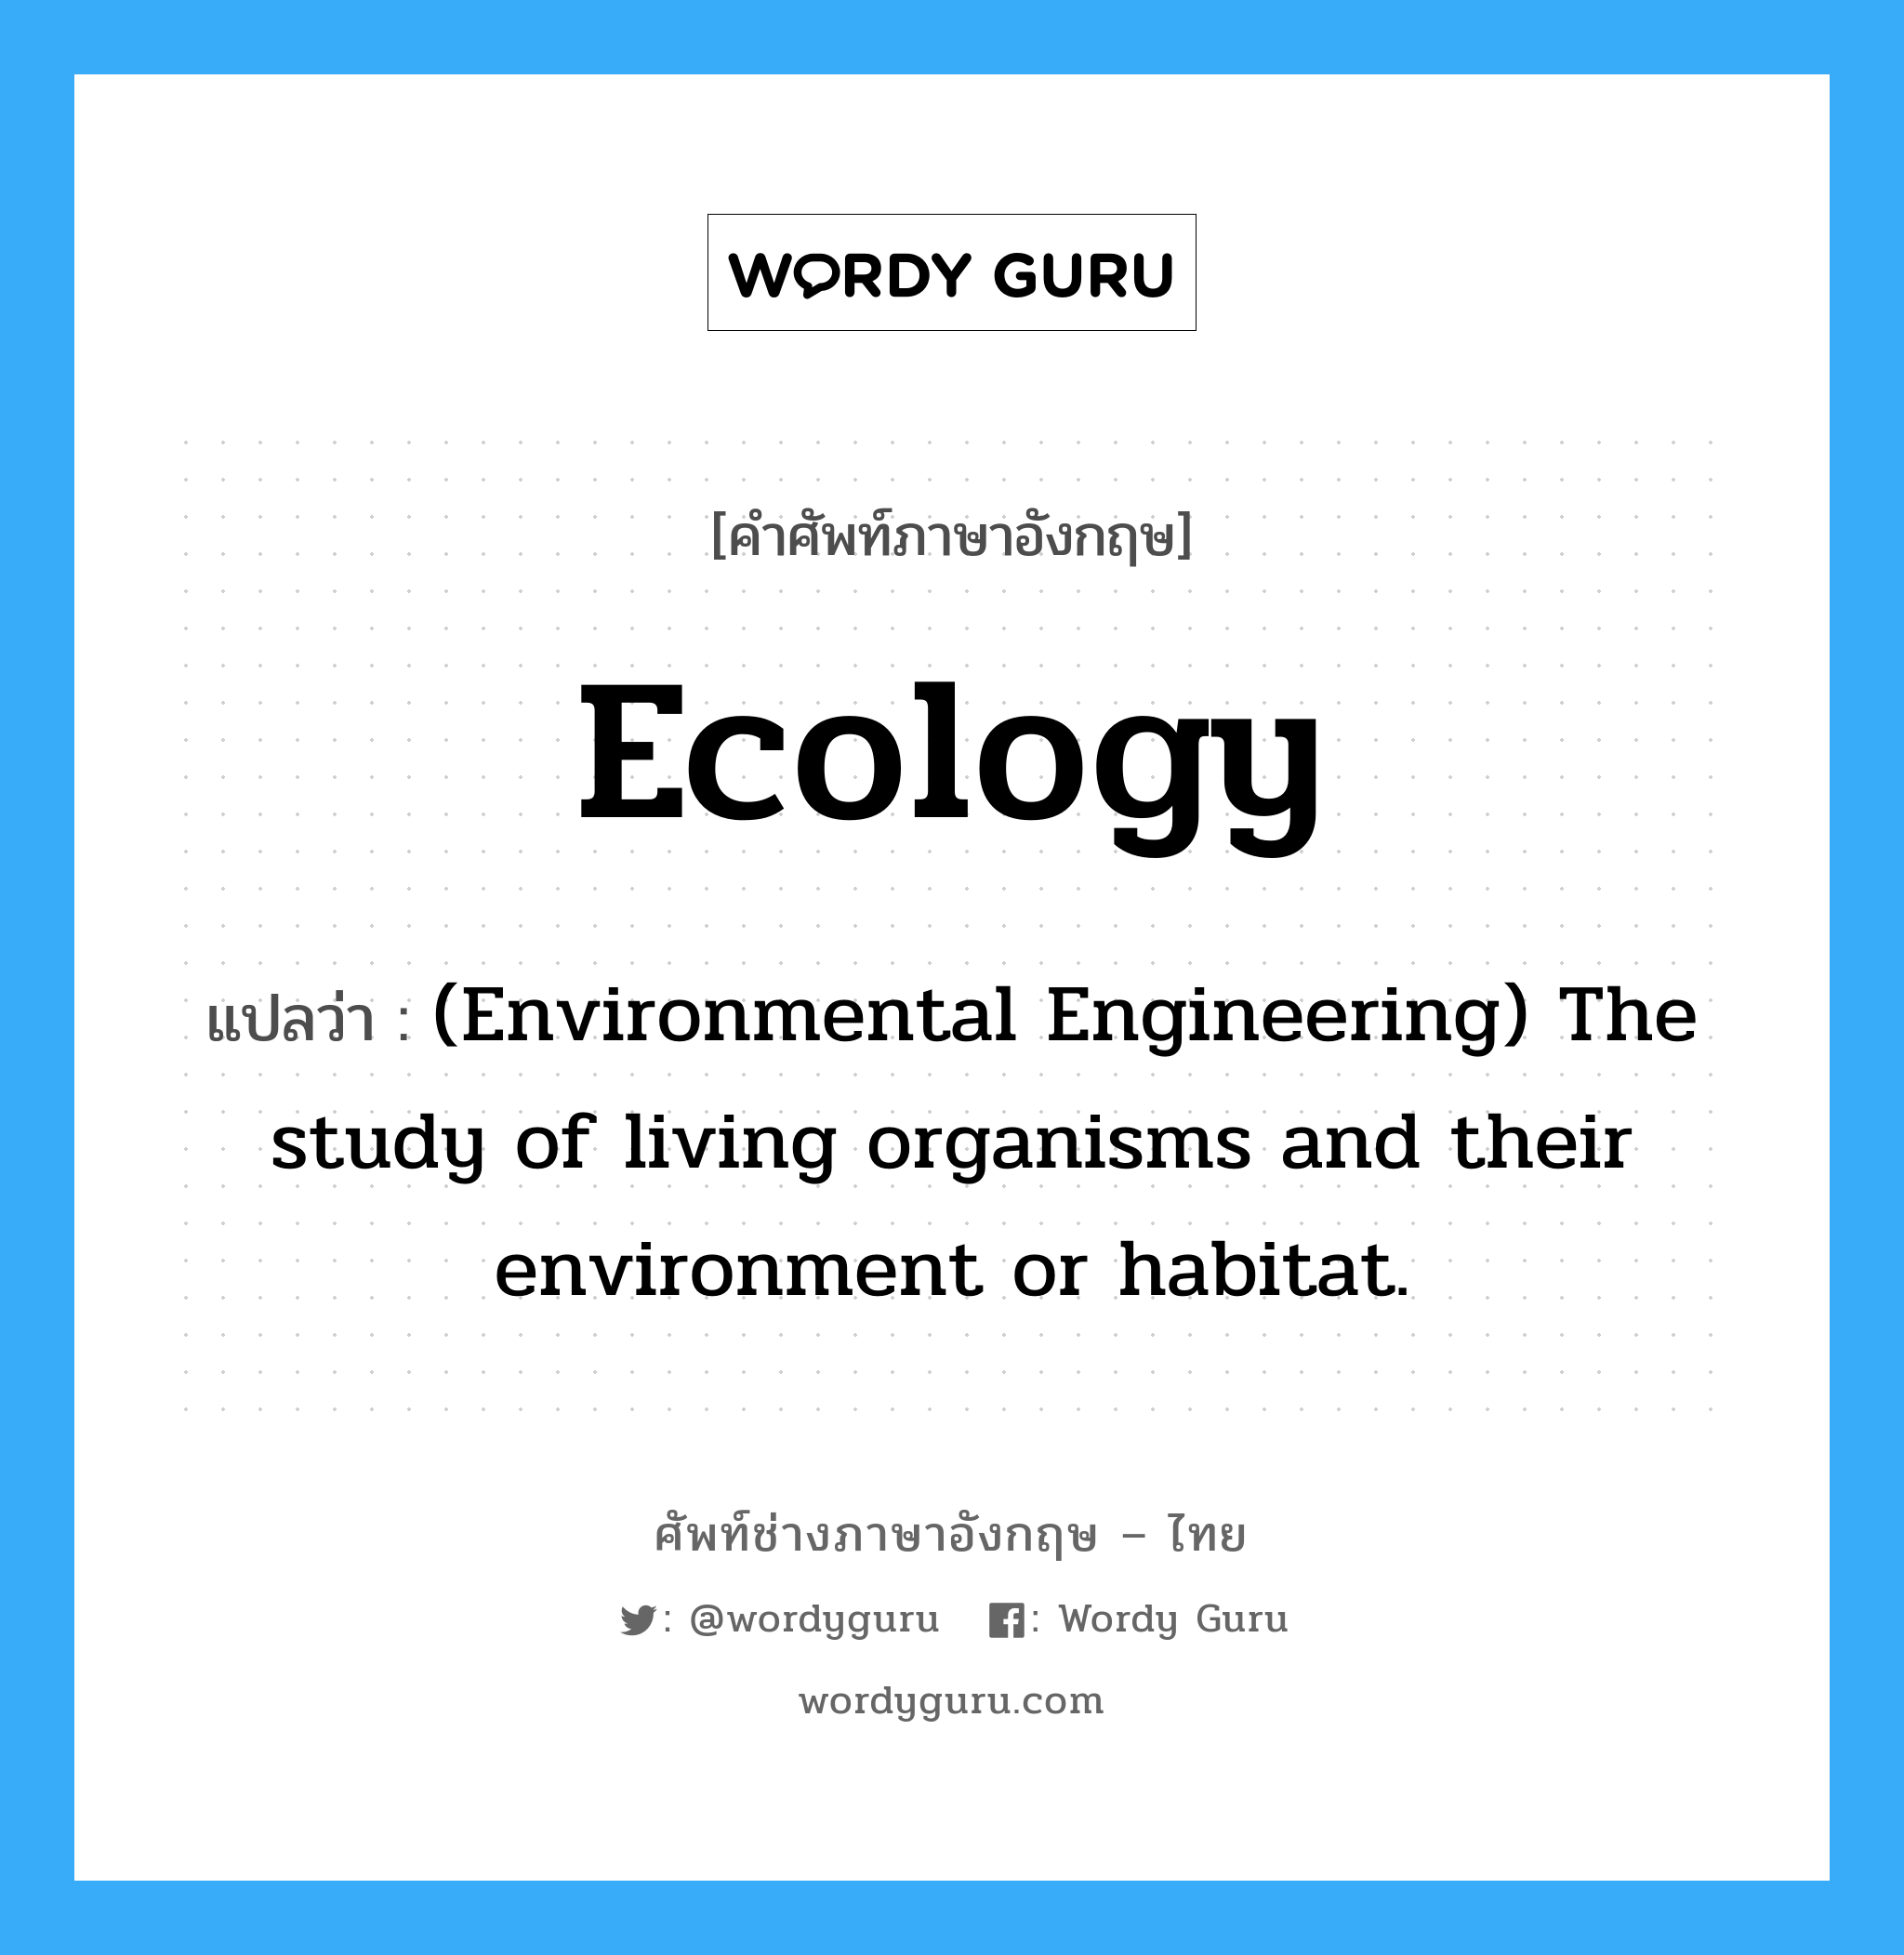 (Environmental Engineering) The study of living organisms and their environment or habitat. ภาษาอังกฤษ?, คำศัพท์ช่างภาษาอังกฤษ - ไทย (Environmental Engineering) The study of living organisms and their environment or habitat. คำศัพท์ภาษาอังกฤษ (Environmental Engineering) The study of living organisms and their environment or habitat. แปลว่า Ecology